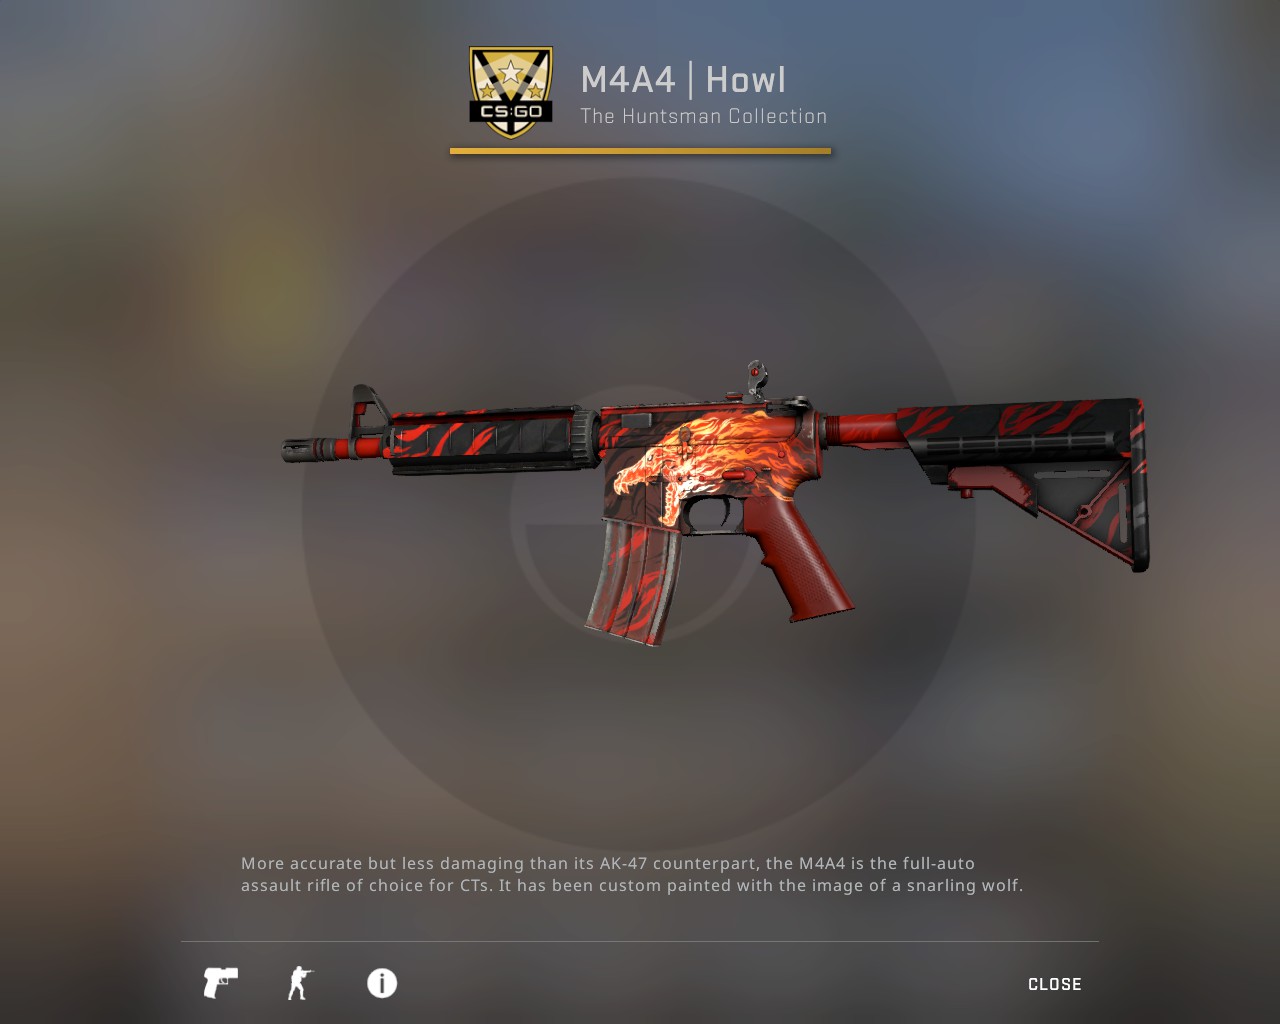 Steam Community :: Guide :: How to get M4A4 | Howl for less than $5